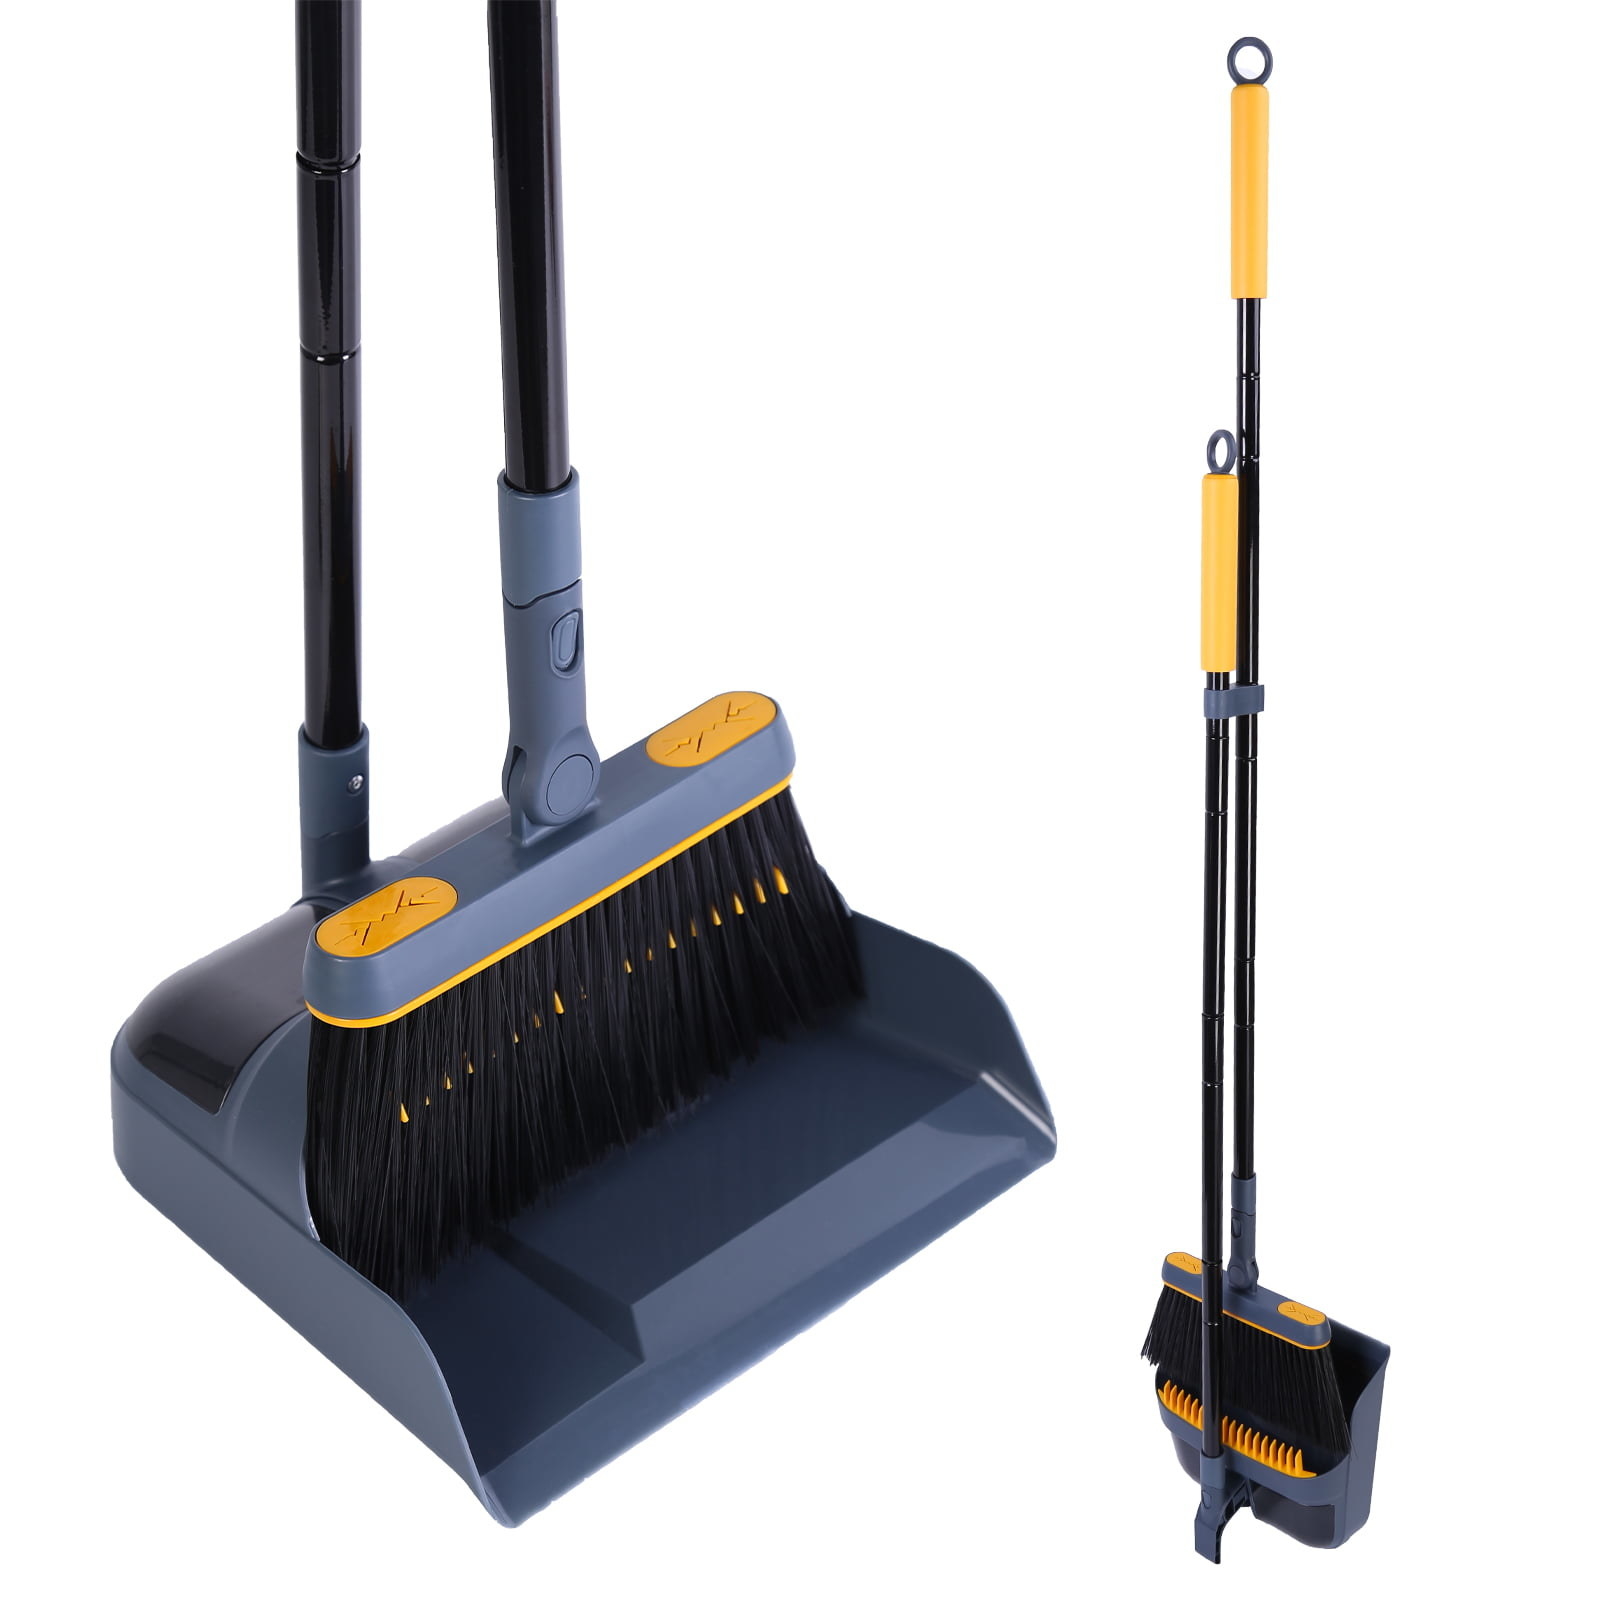 the broom in a navy blue